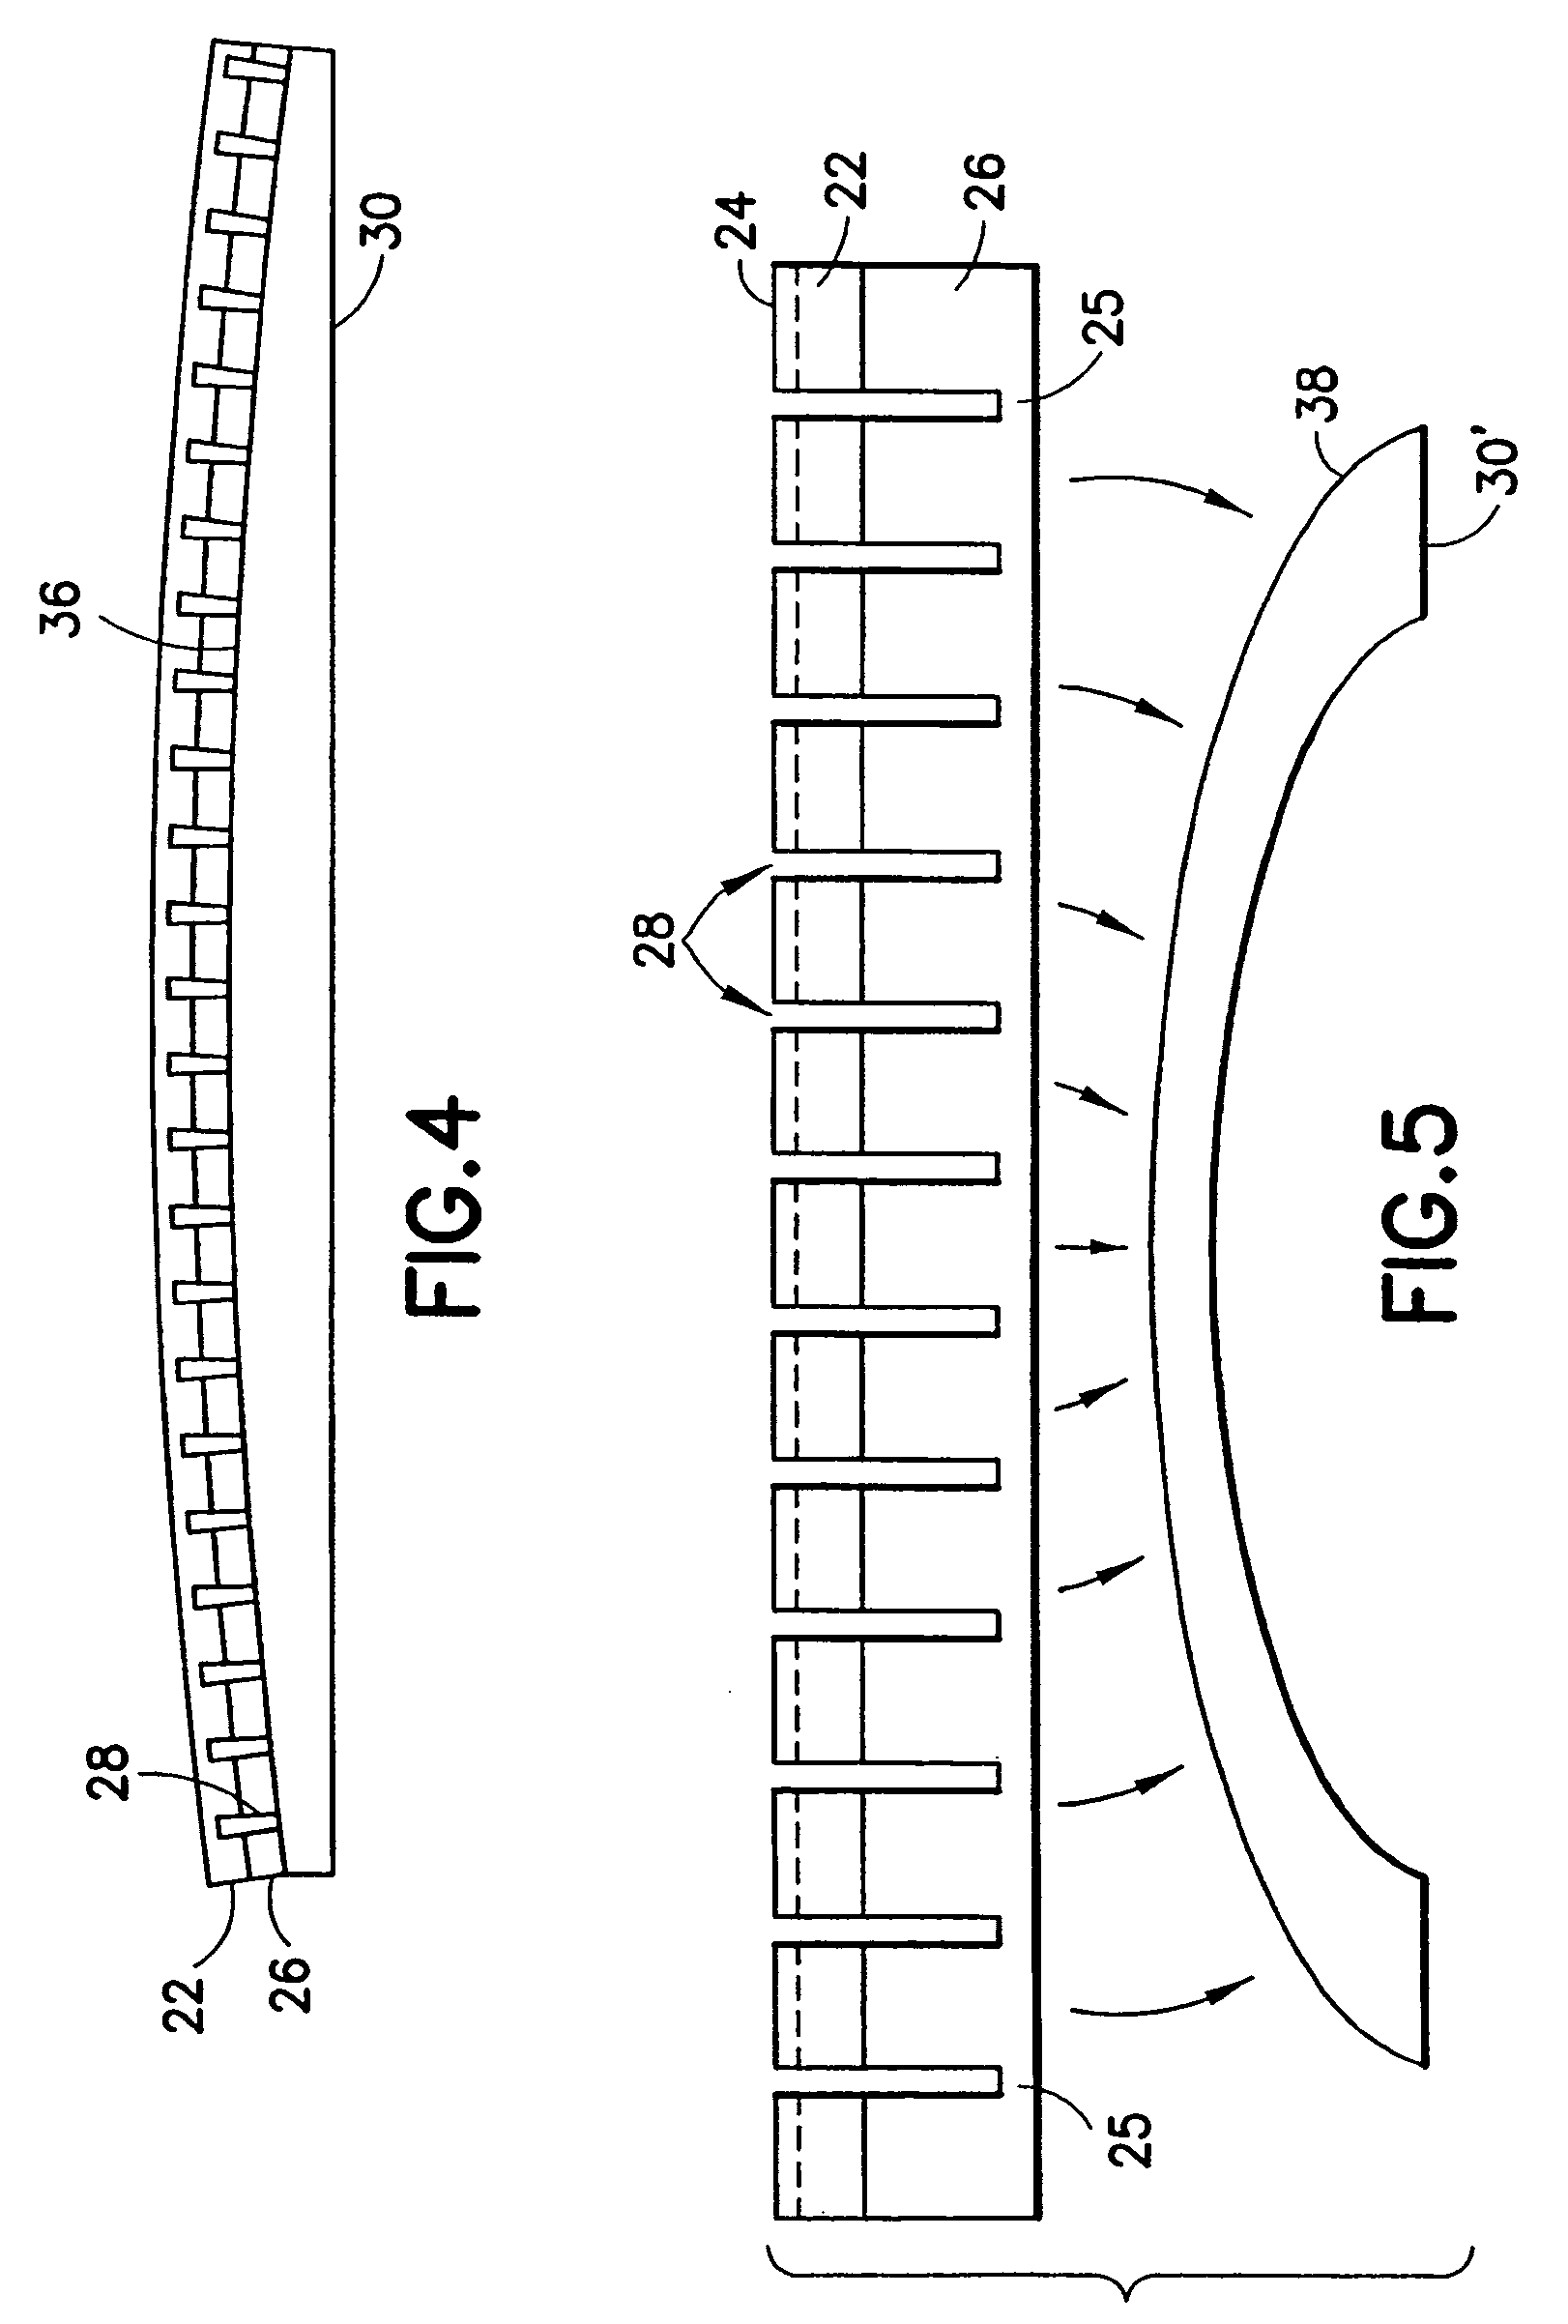 Curved micromachined ultrasonic transducer arrays and related methods of manufacture